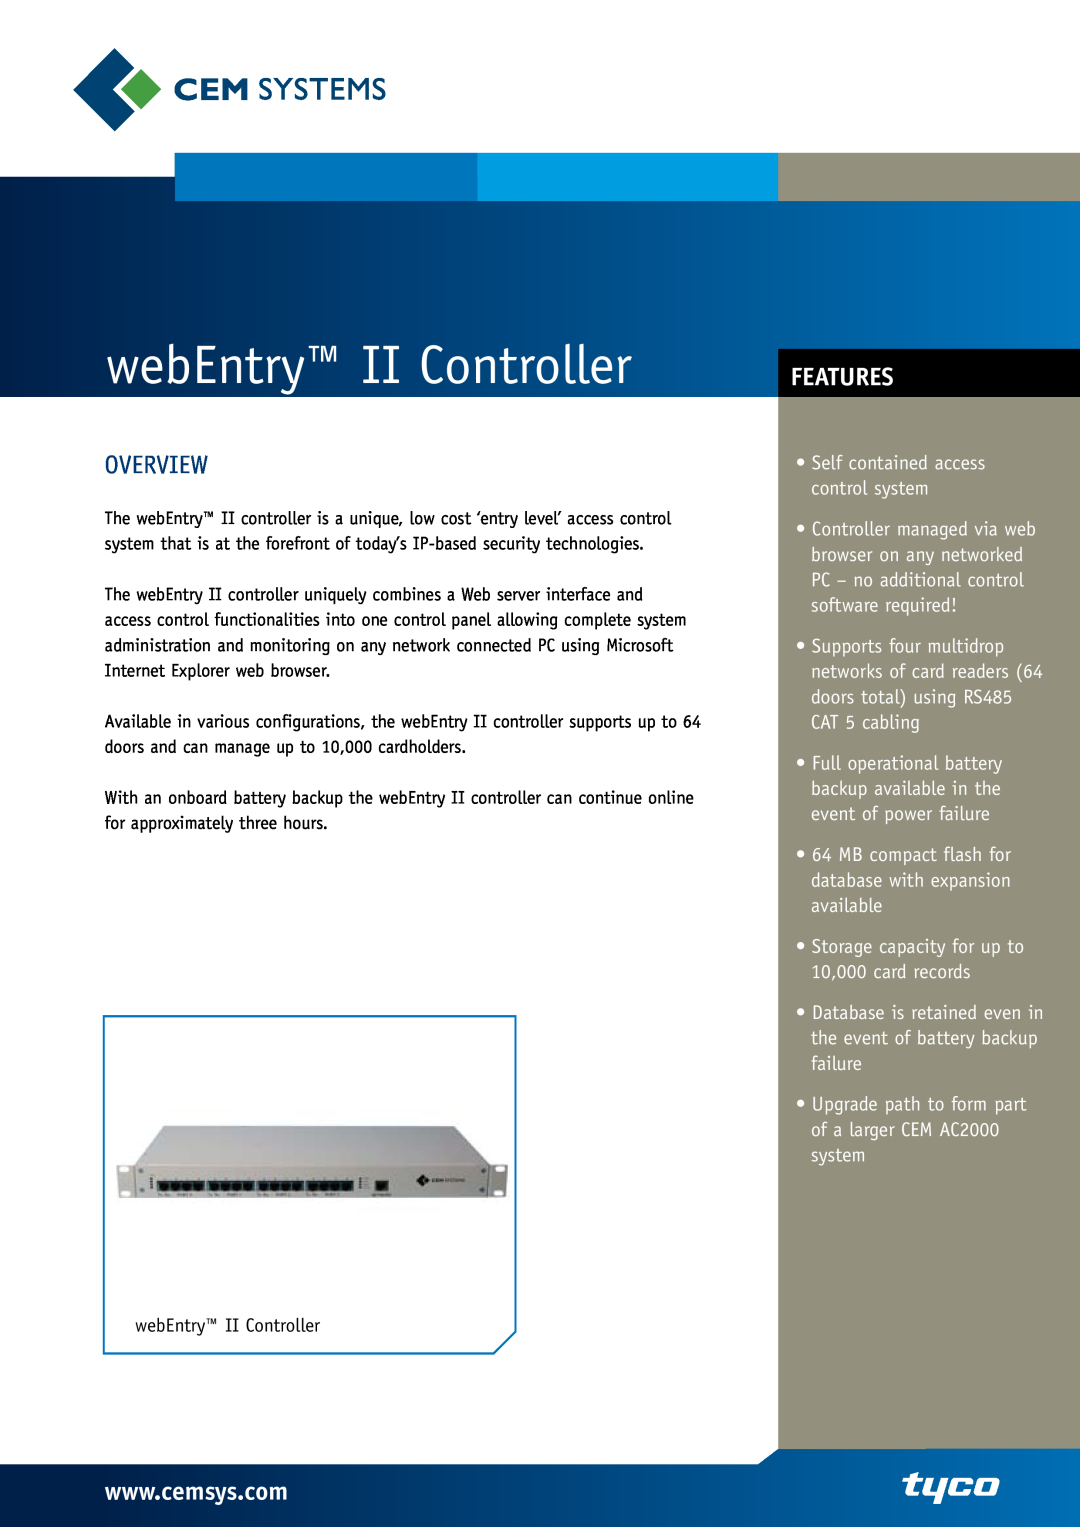 Tyco manual webEntry II Controller, Overview, Features, MB compact flash for database with expansion available 